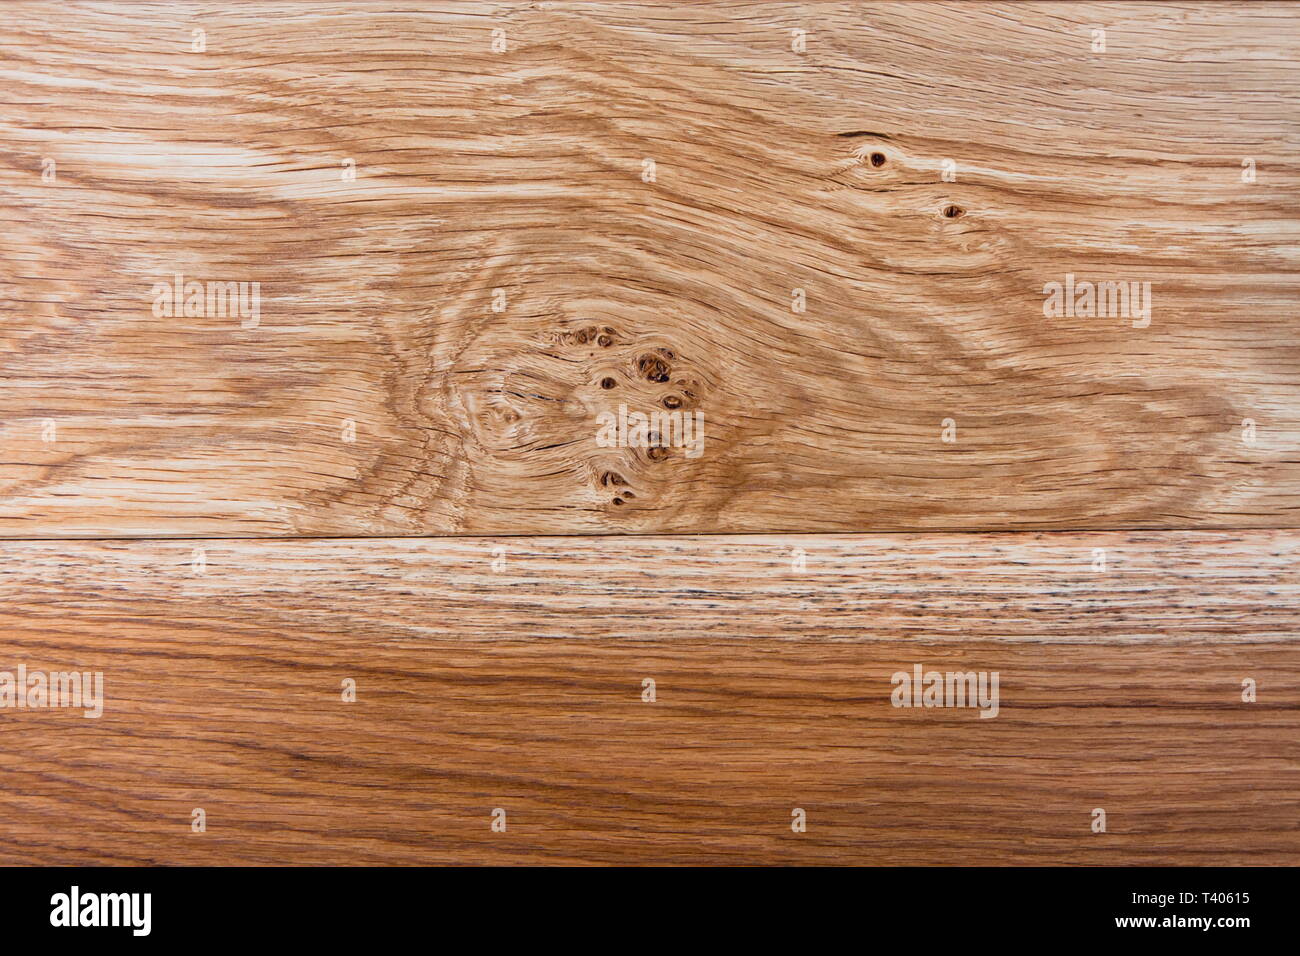 texture of natural oak boards with beautiful knots Stock Photo